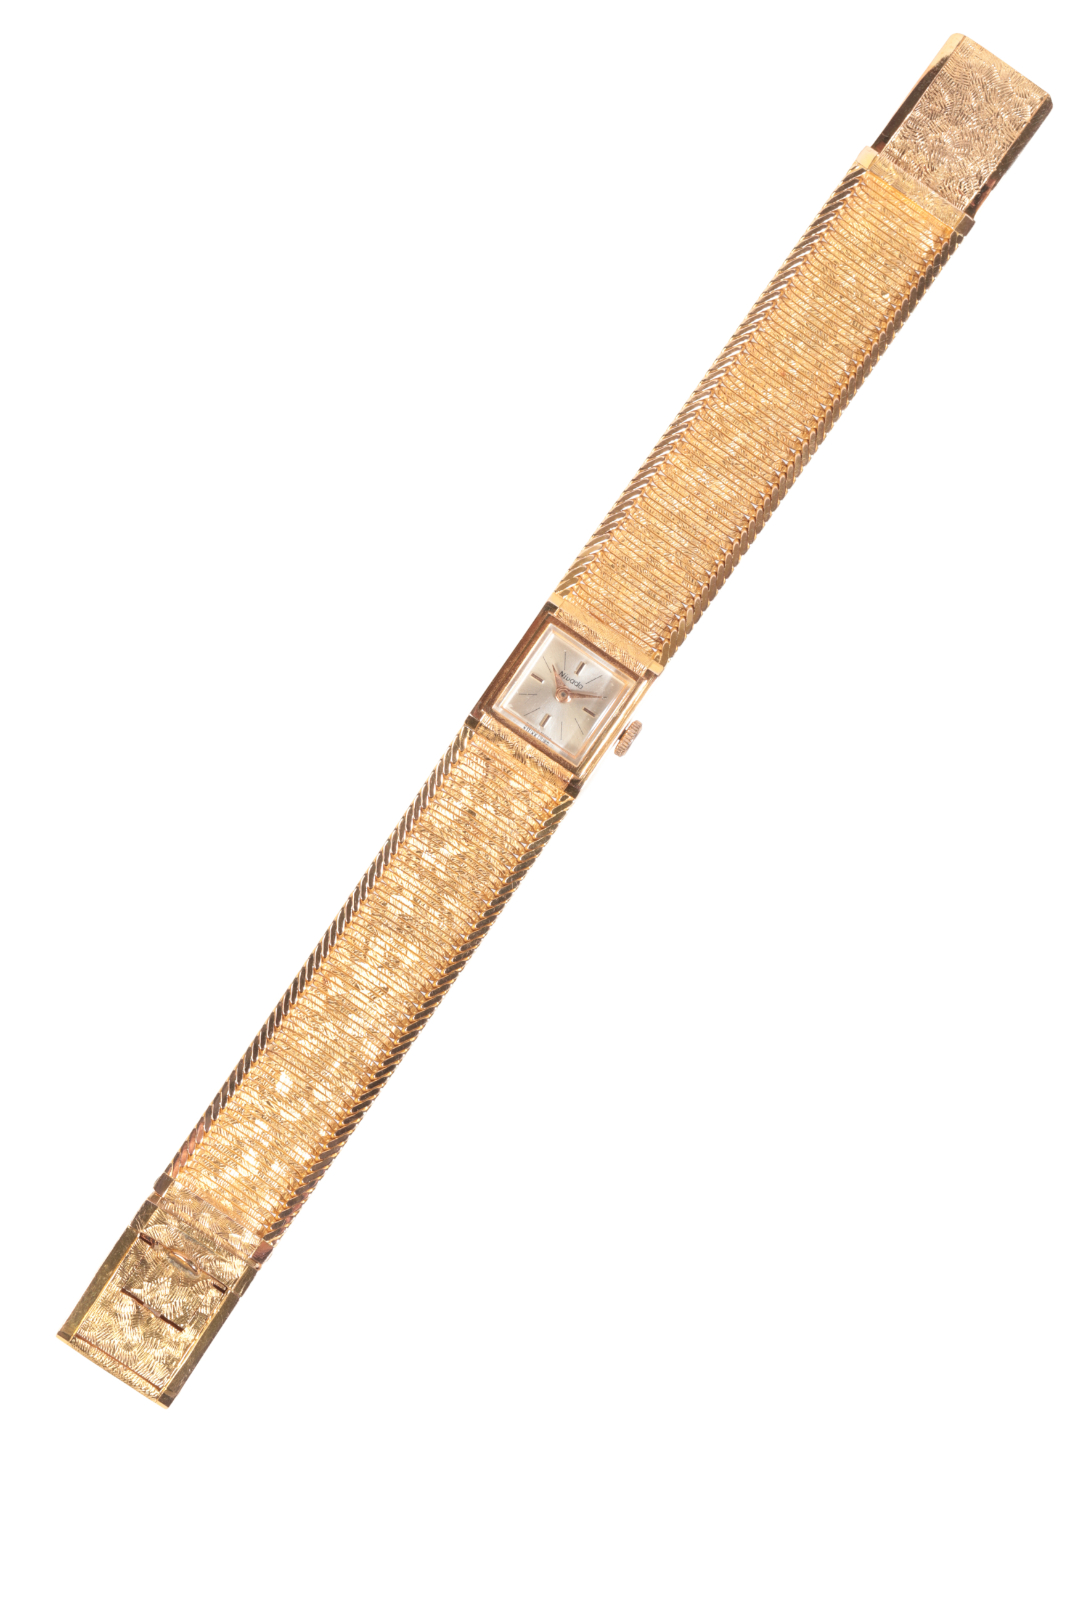 NIVADA: A LADY'S 18CT GOLD BRACELET WATCH - Image 2 of 2